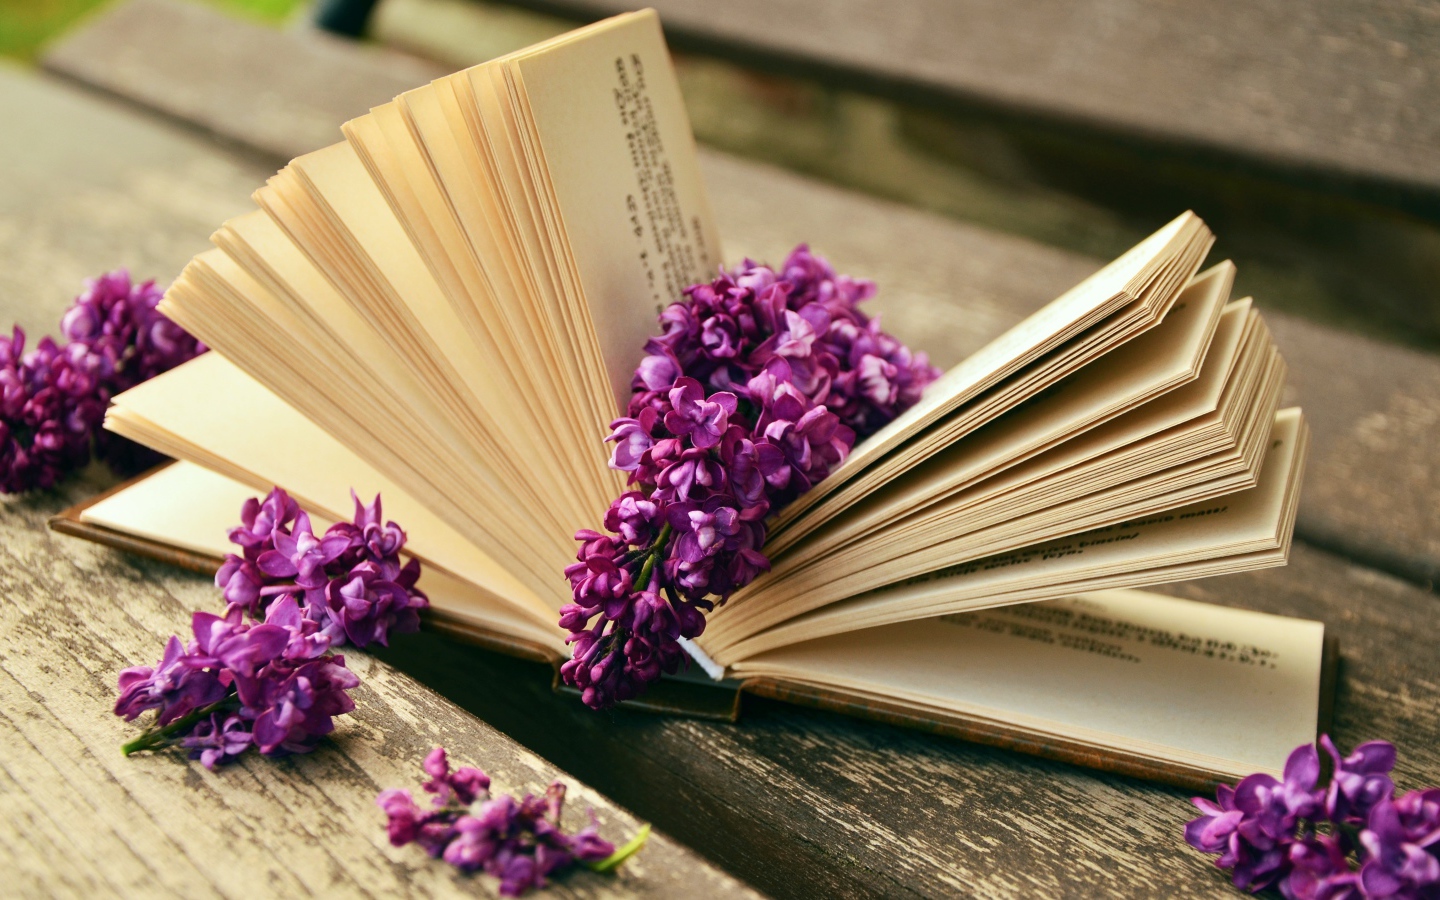 Lilac flowers lie on a book on a bench